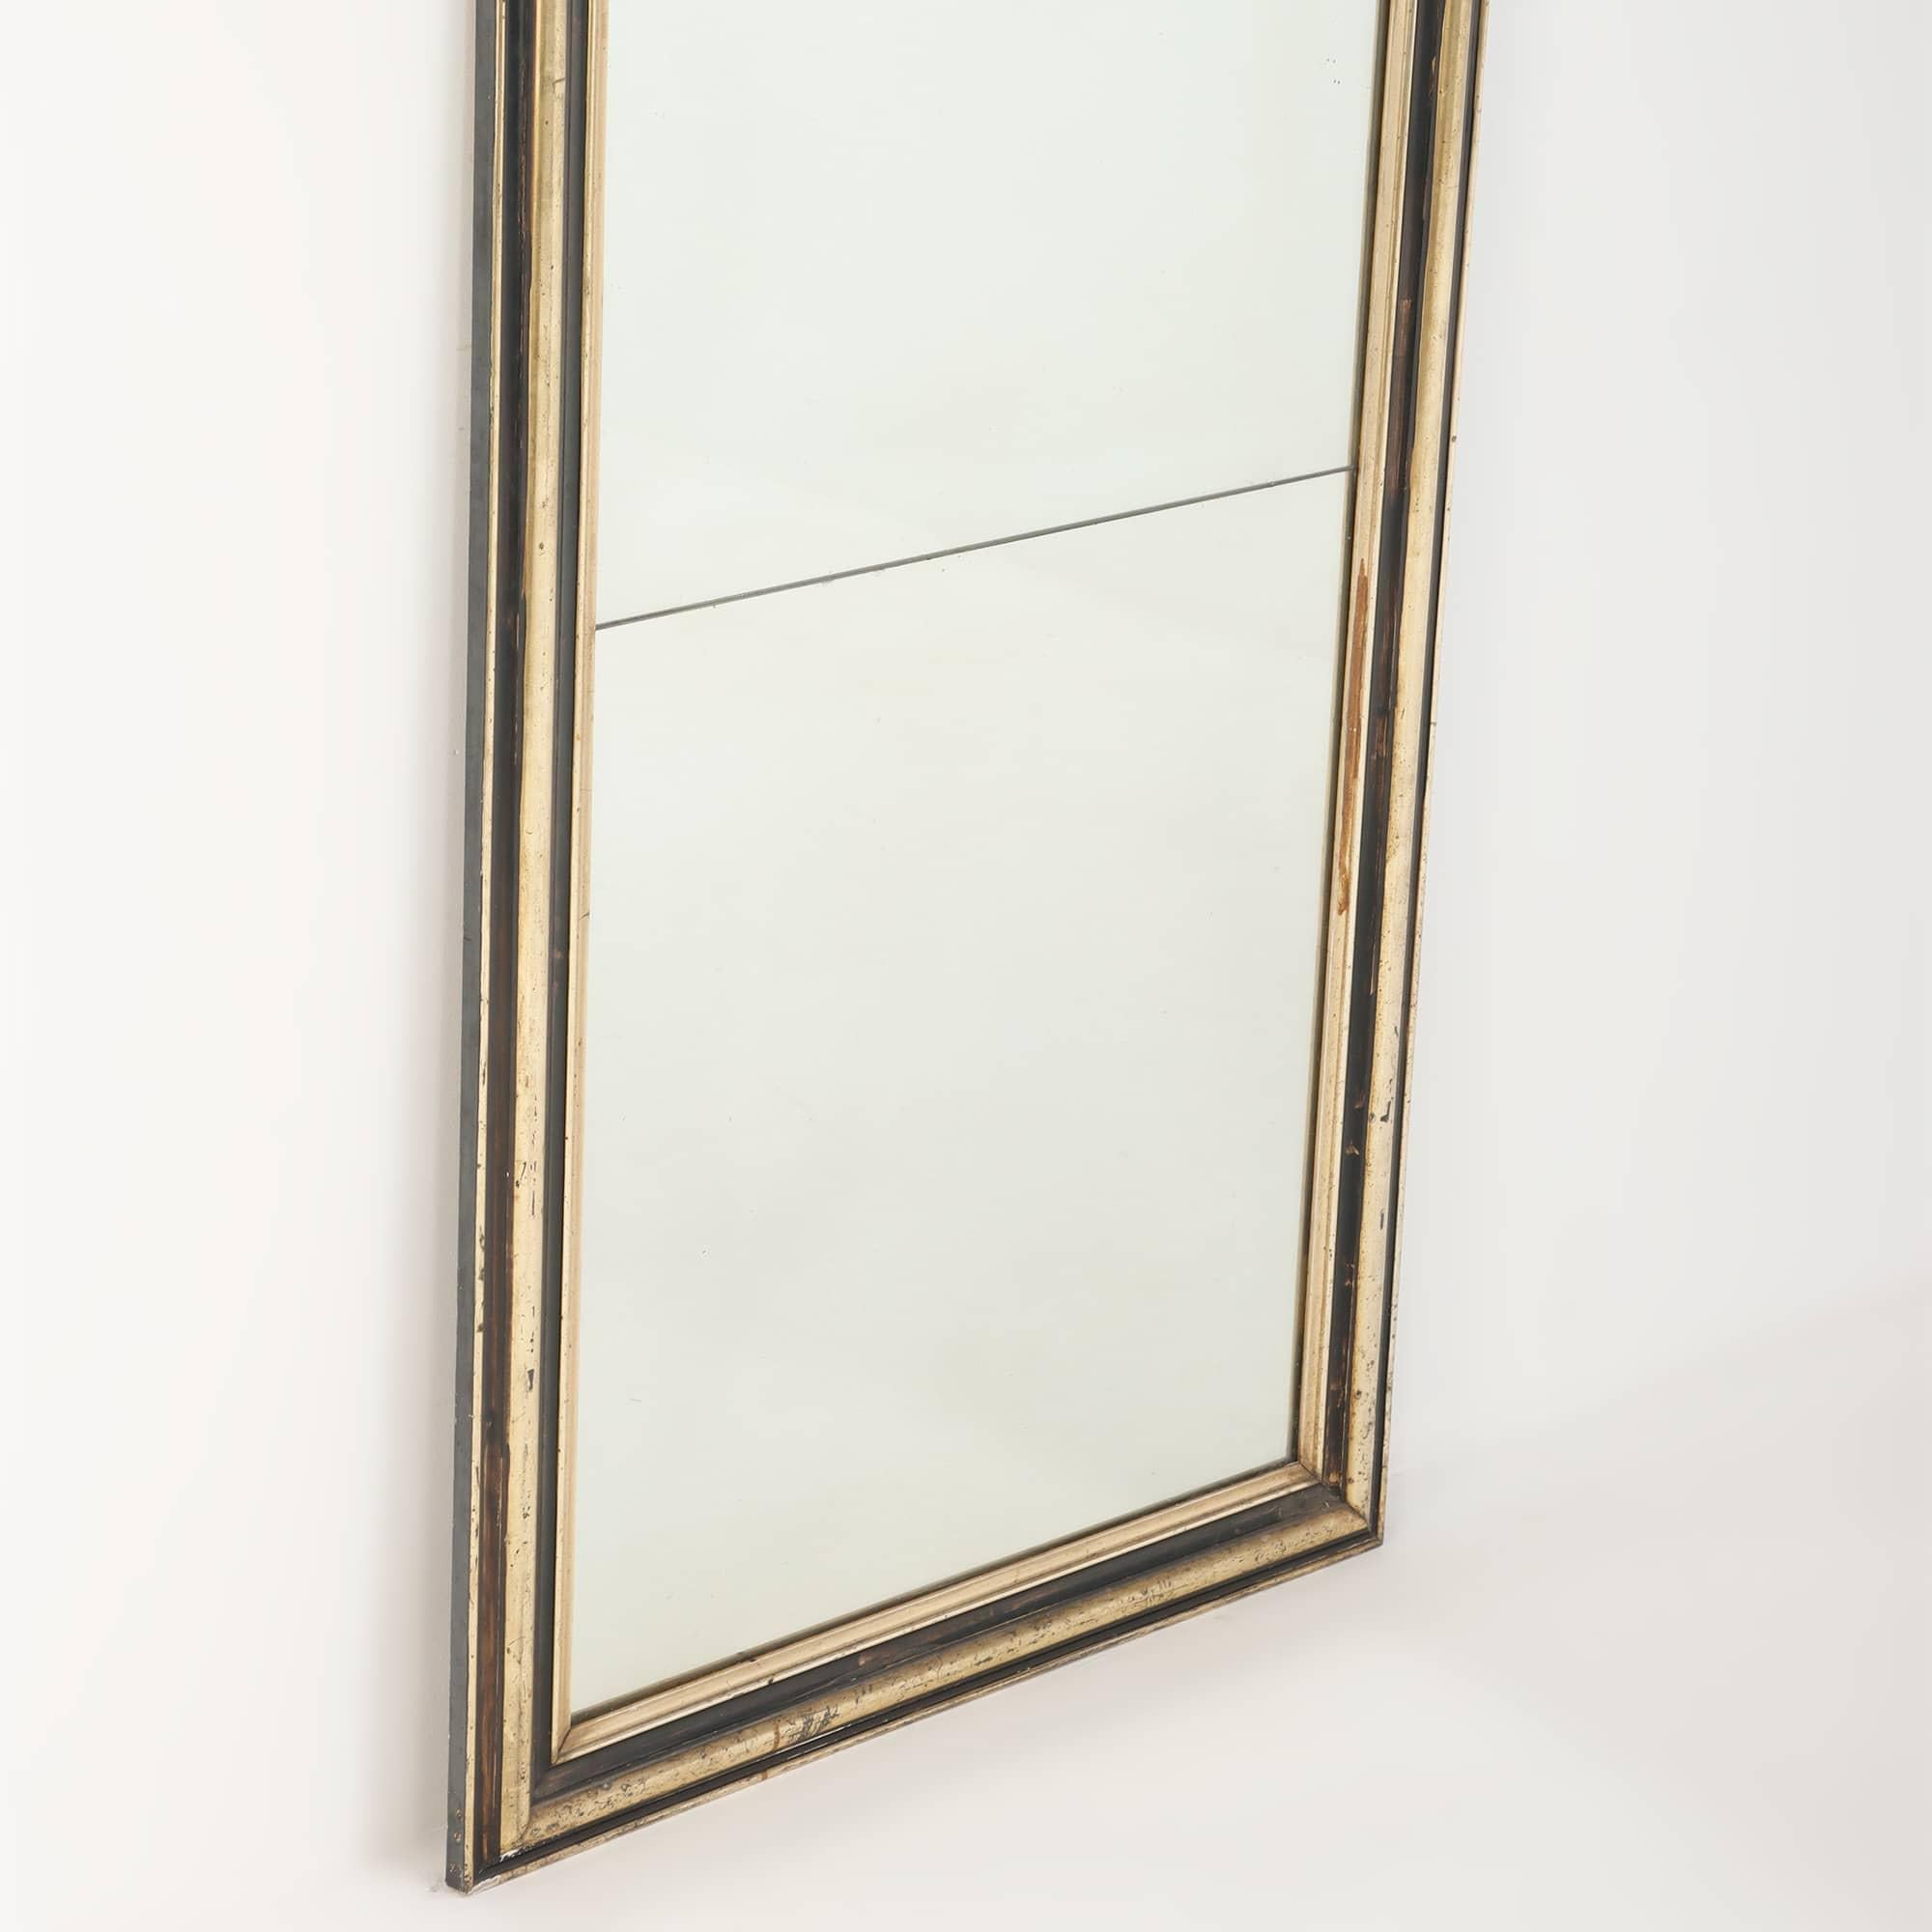 French mirror with partial ebonized and gilt frame C 1860. The gilding is a silvery gold. The back bearing the label of F. Toute Rouen.